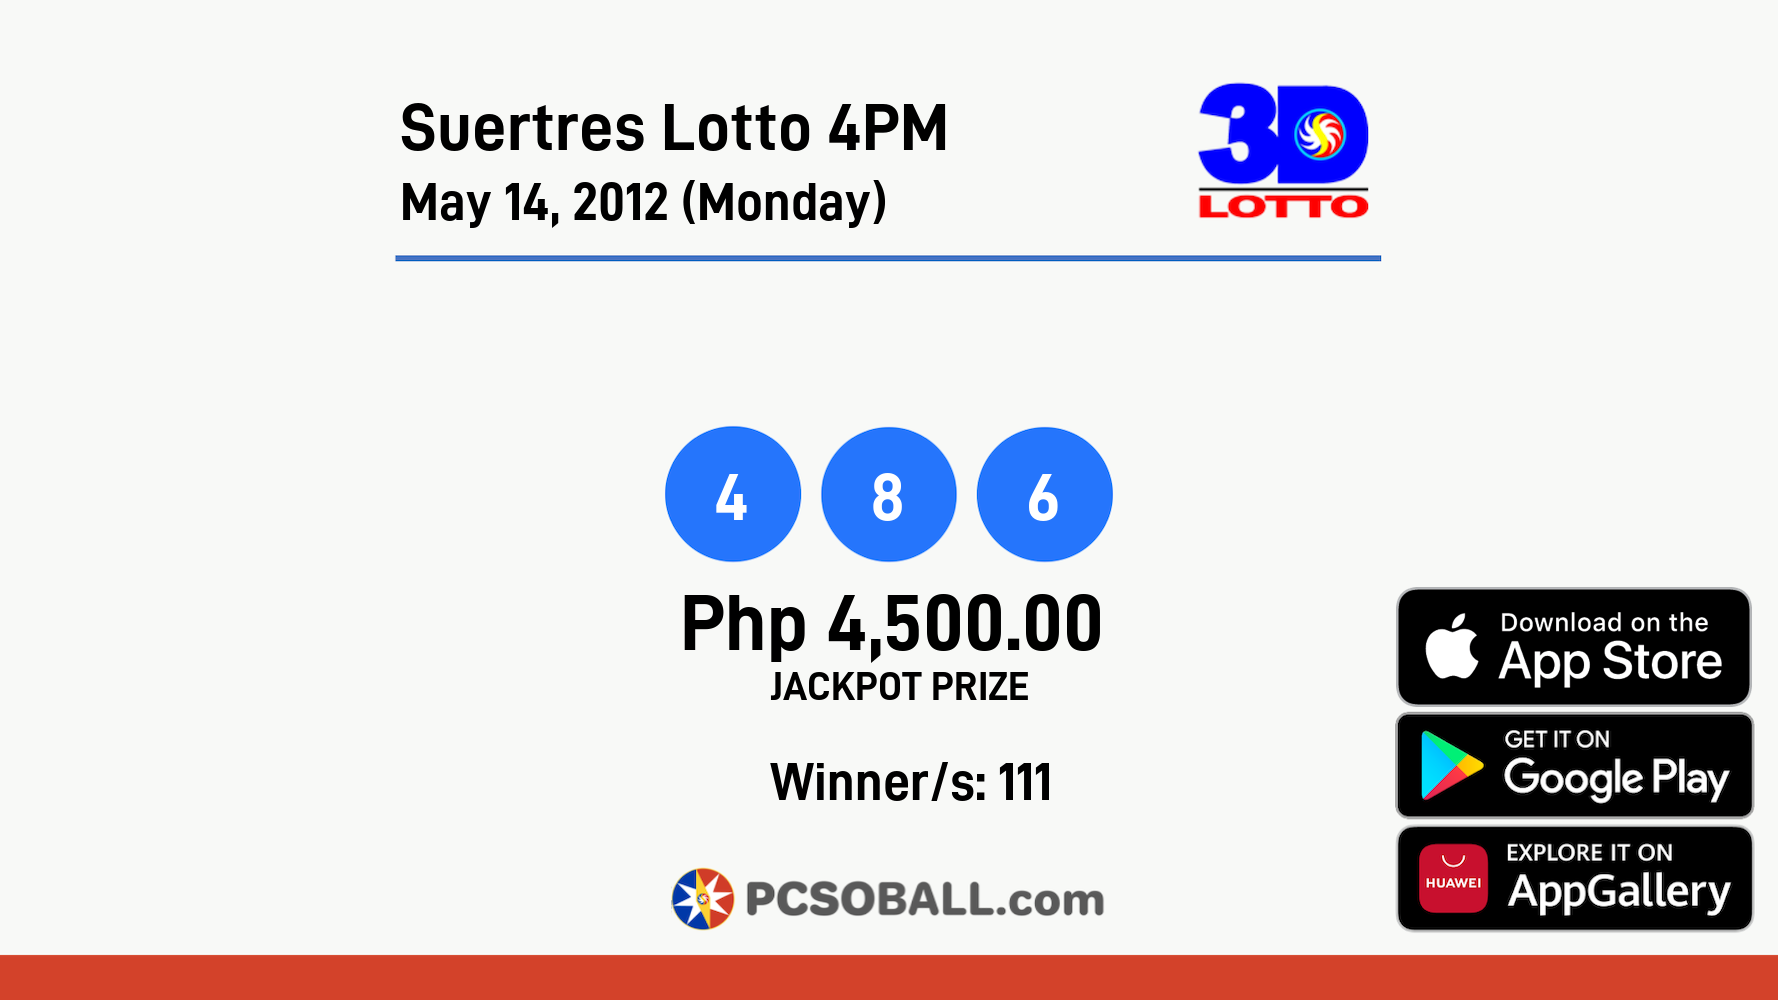 Suertres Lotto 4PM May 14, 2012 (Monday) Result